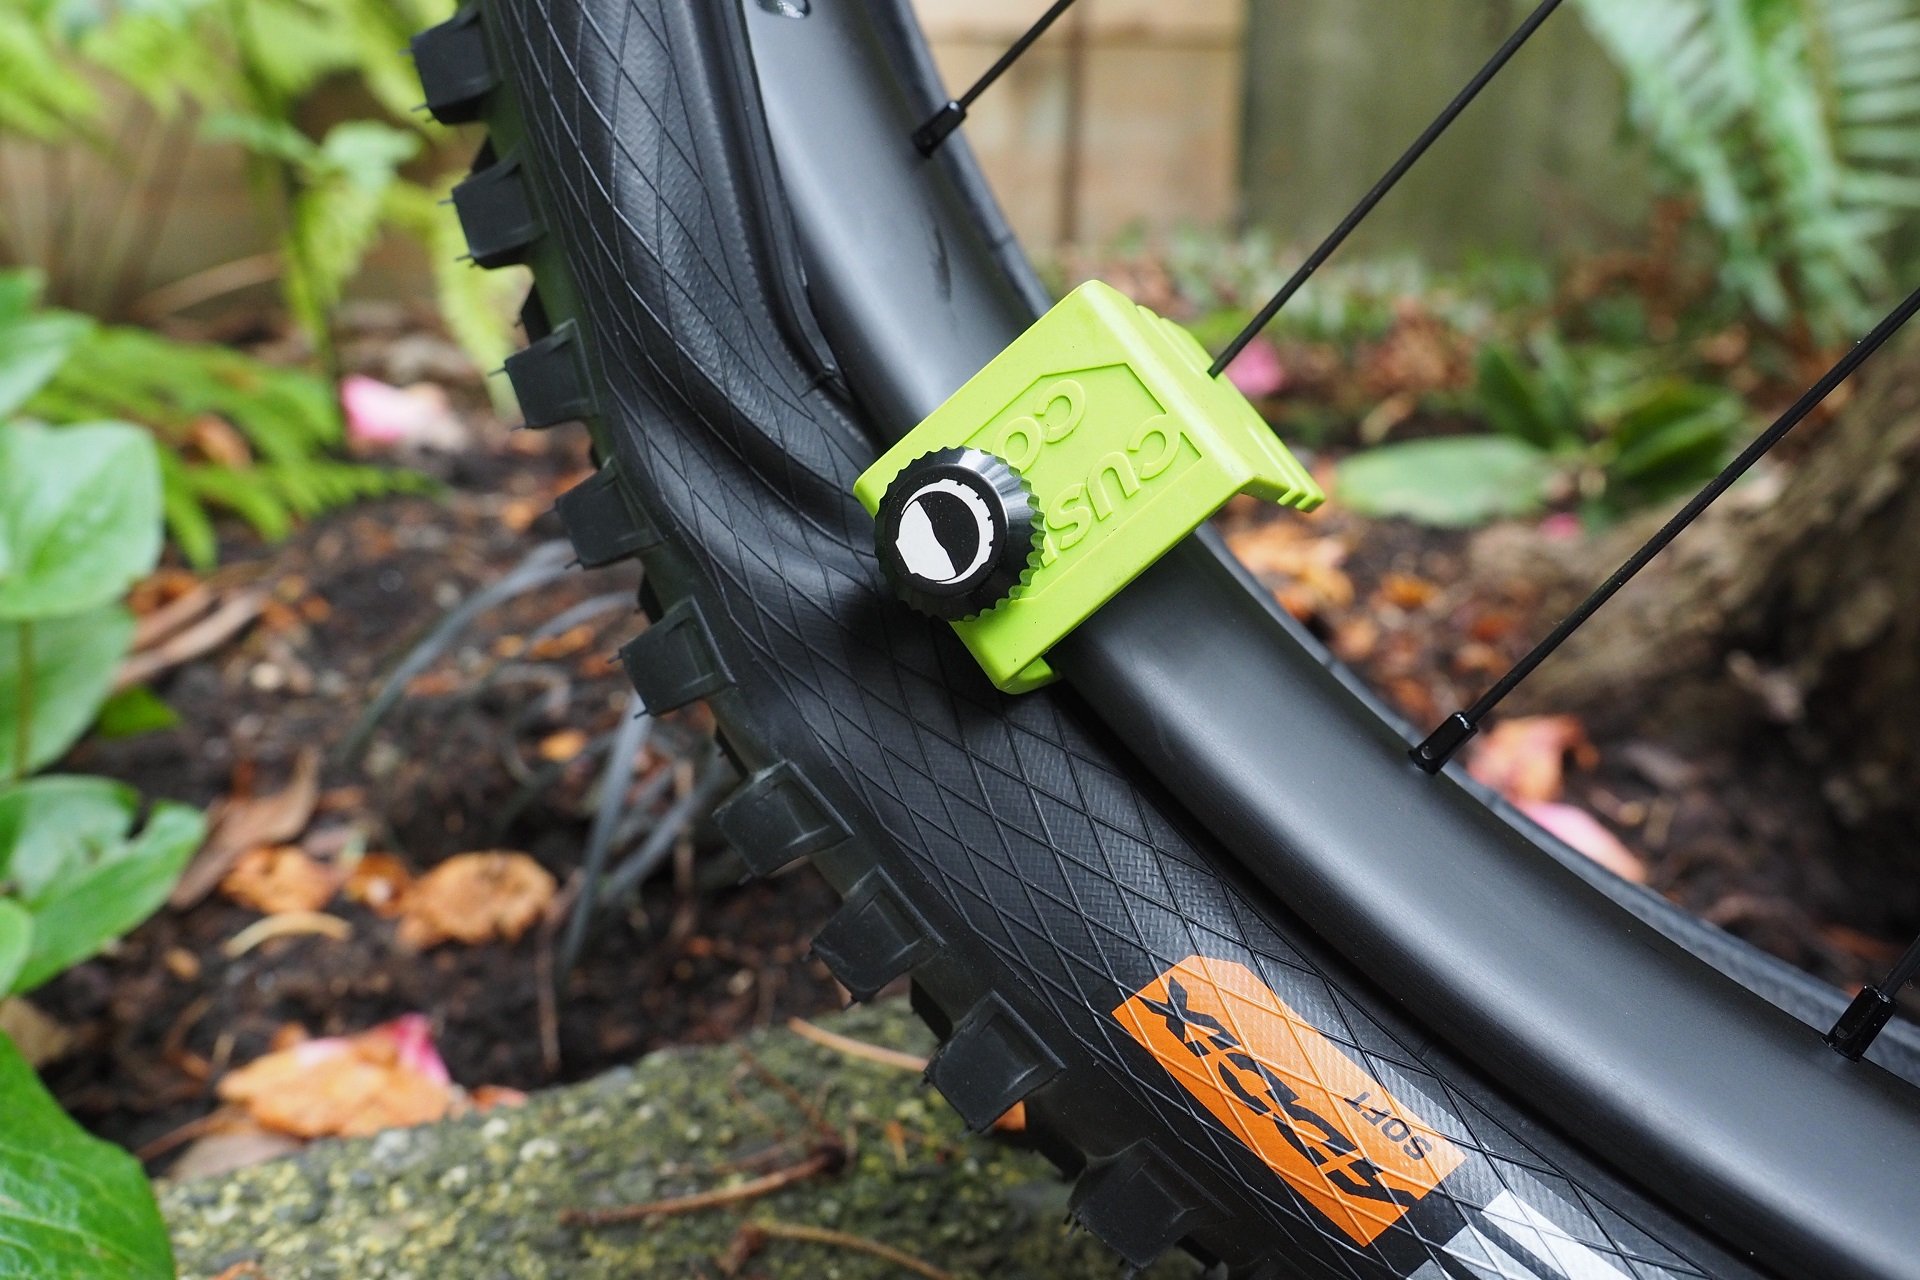 Review: CushCore Pro Inserts allow crazy low tire pressures for